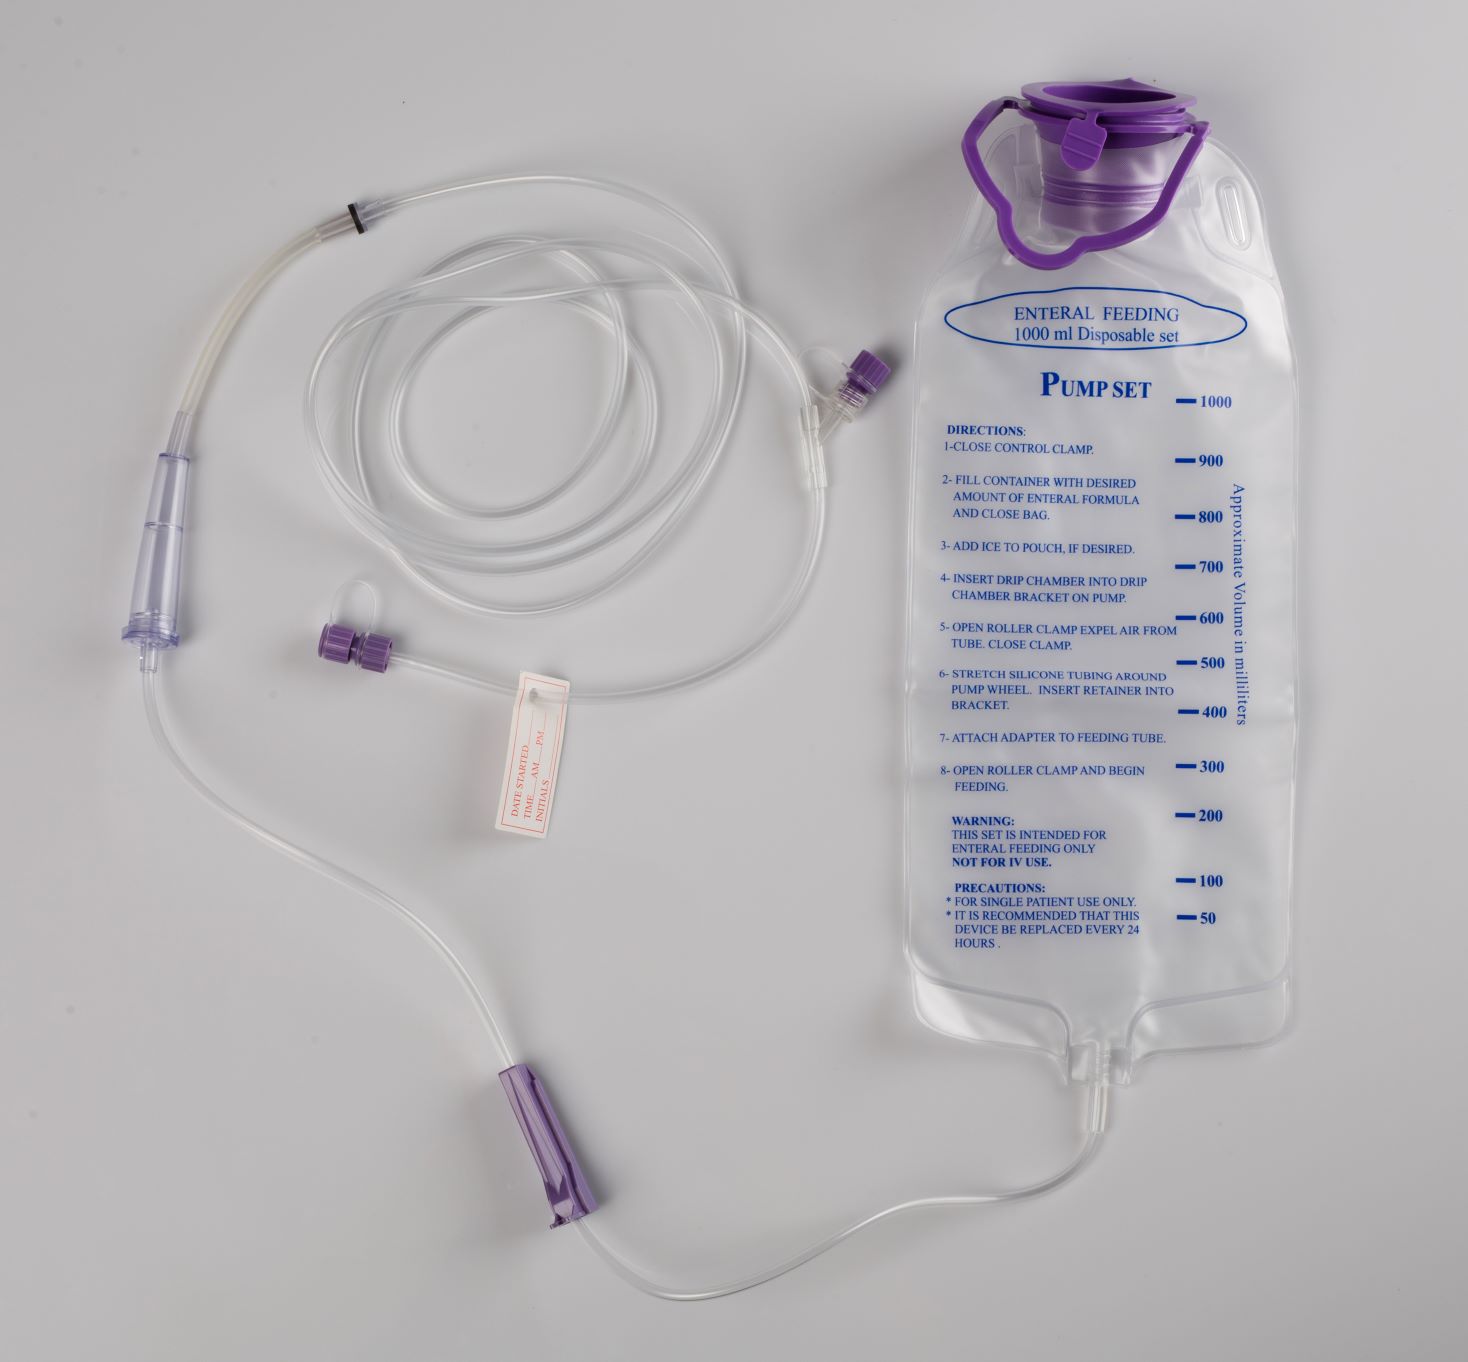 Enteral Bag with Enfit connector